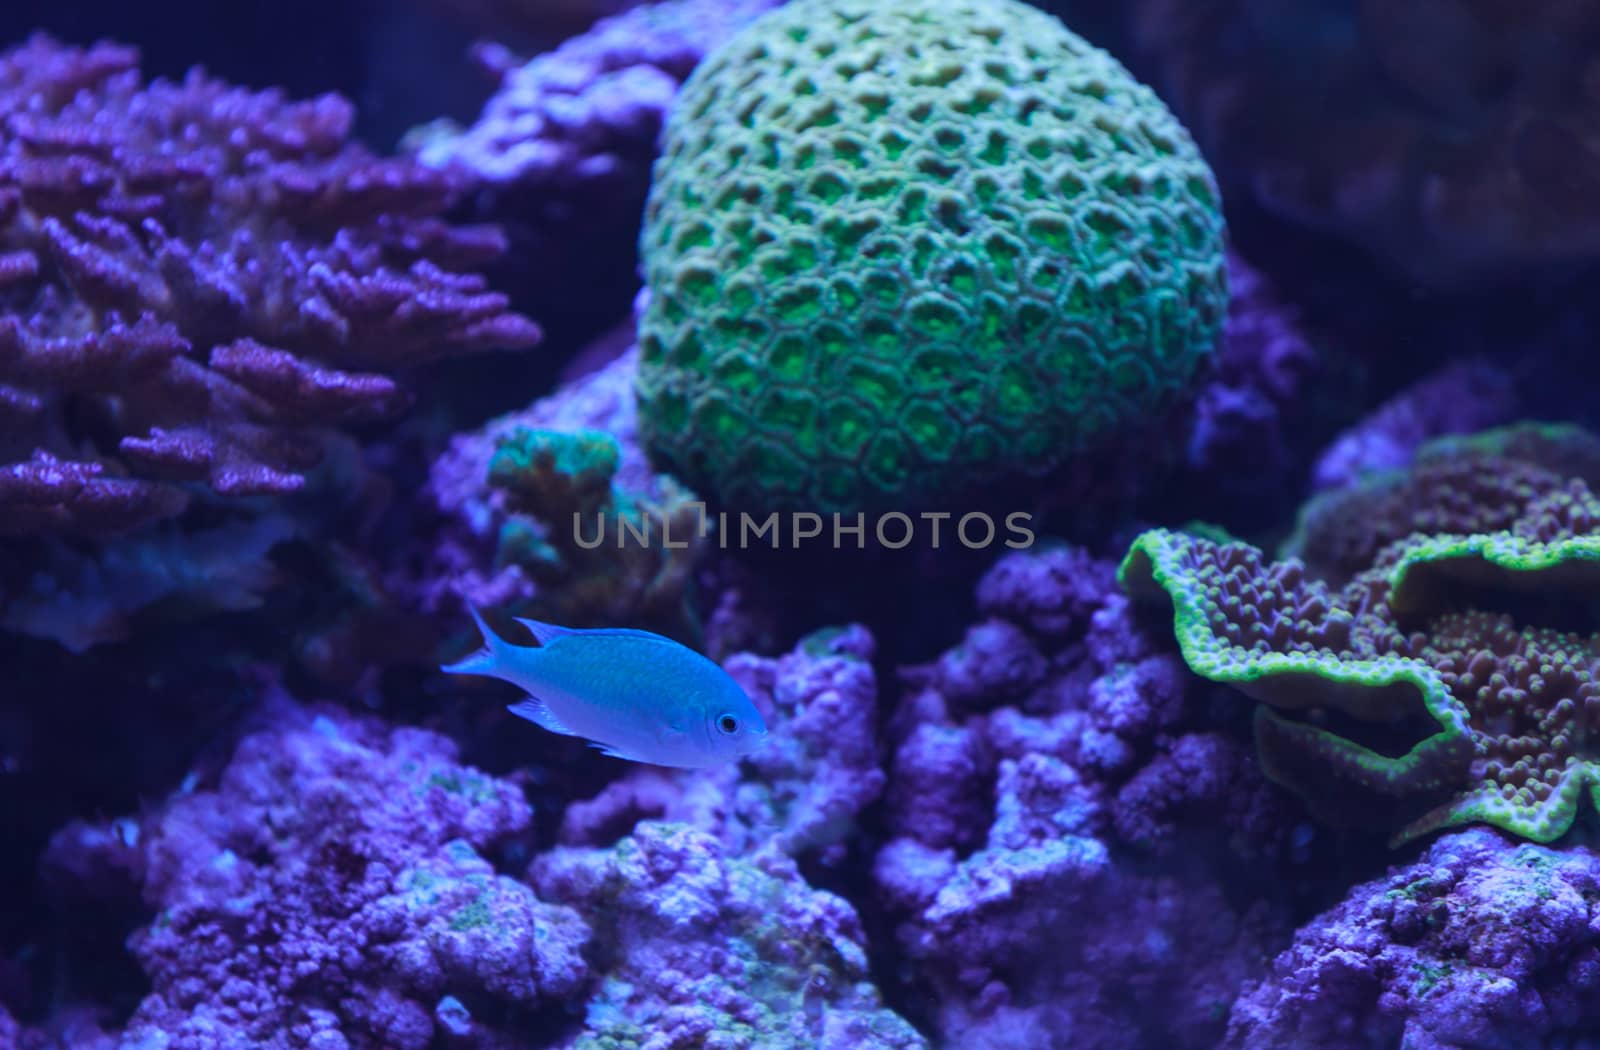 Green chomis, Chromis viridis, has a pale green color and is found on the reef